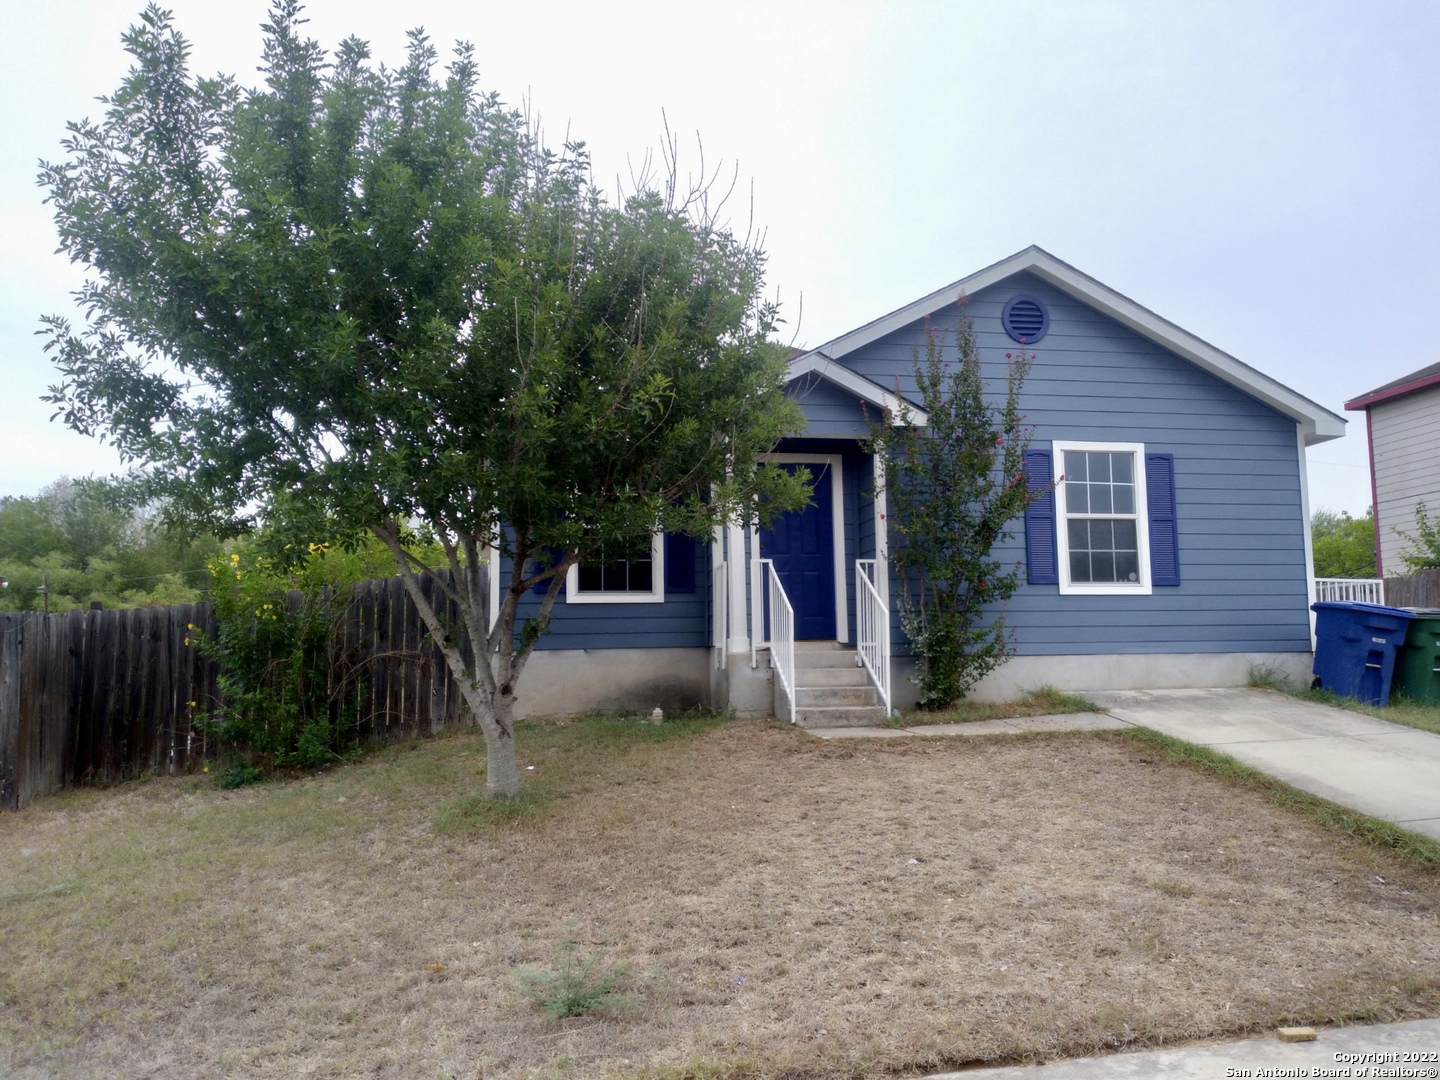 One story home located in the NW area of San Antonio. Home features 3 bedrooms 2 full baths. Great layout! Must see!! Fresh paint inside and out! A huge backyard and a dog park a block away!